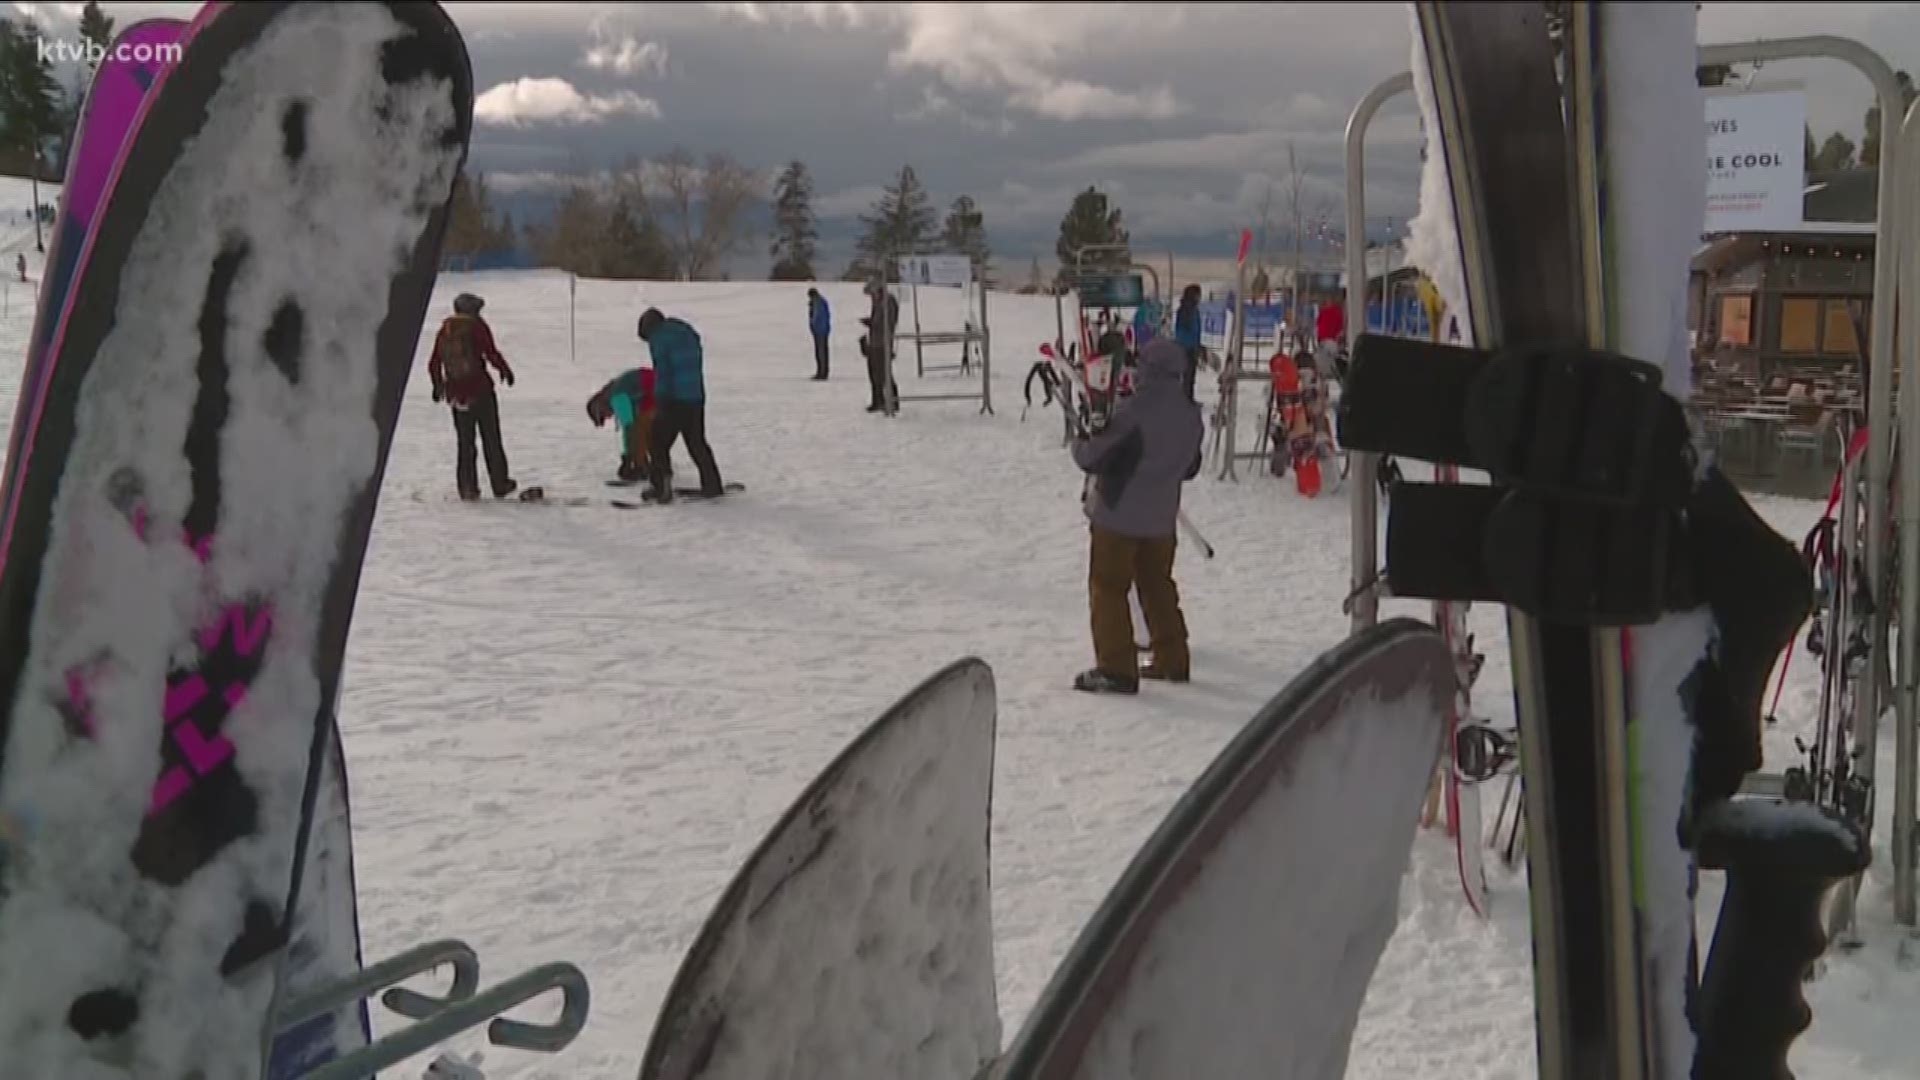 Skiers and boarders are taking advantage of all the new powder on the slopes.